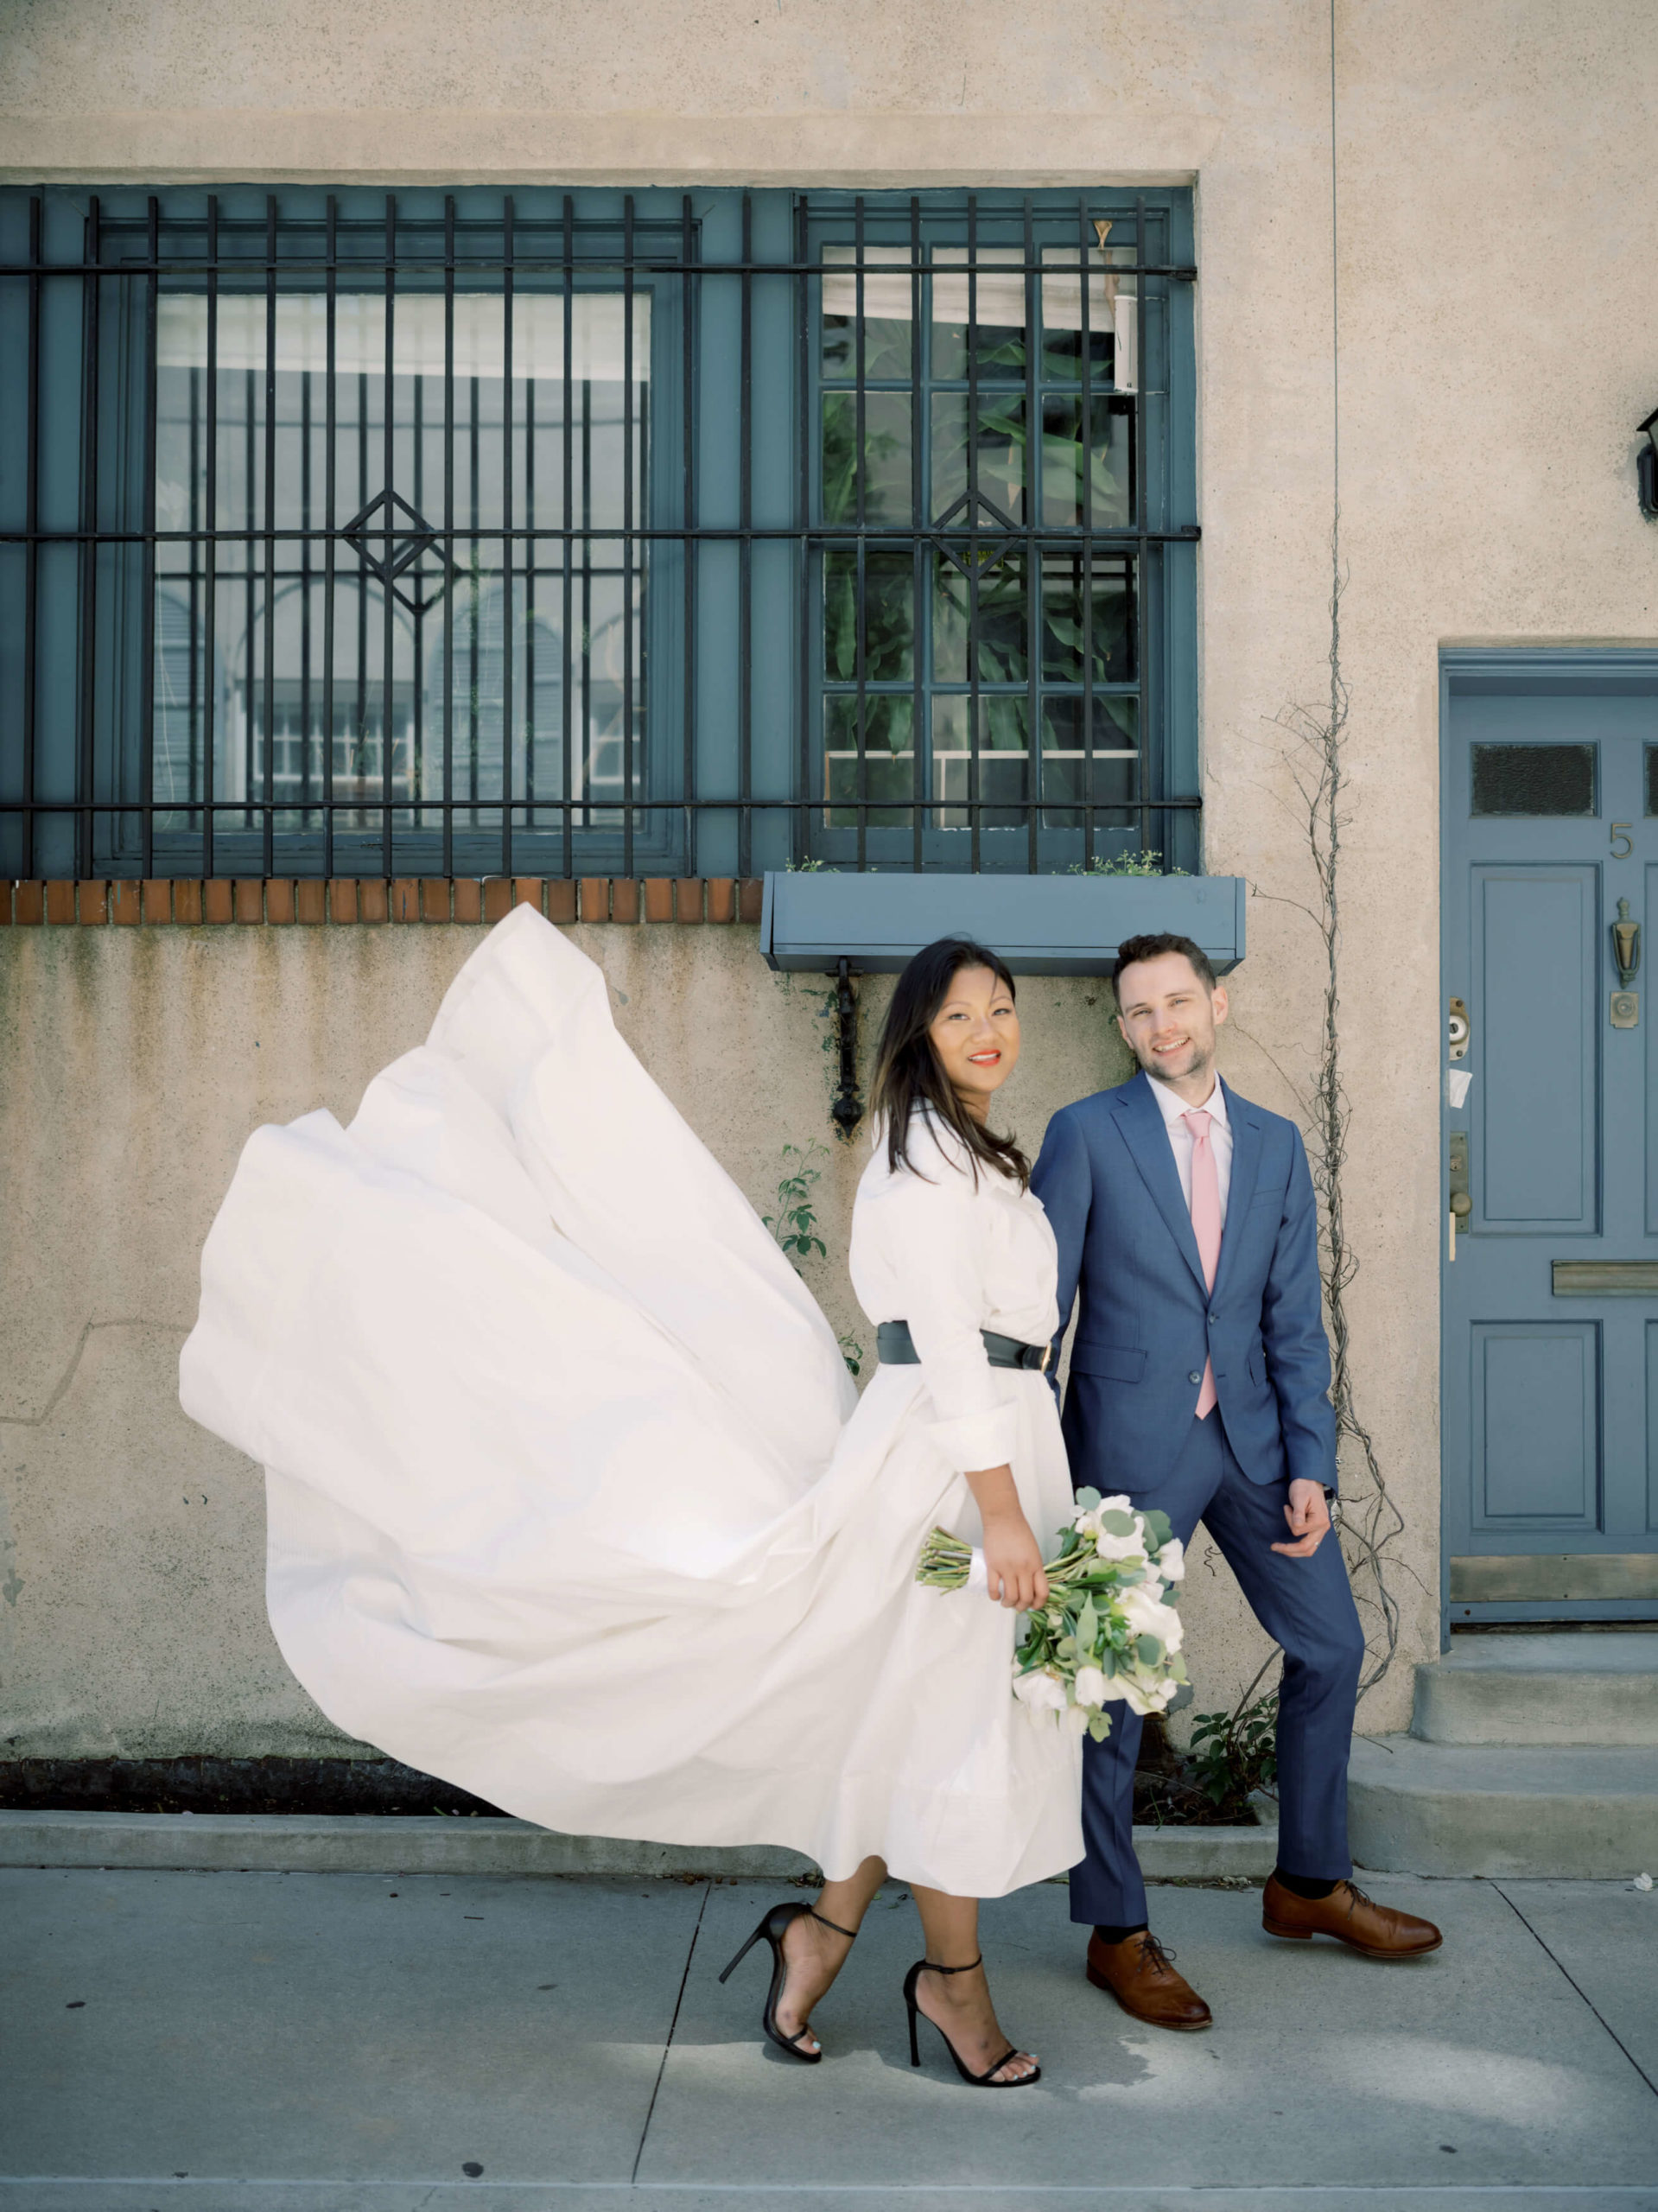 The newly-weds are walking in the streets of NYC after their city hall wedding. Editorial elopement Image by Jenny Fu Studio